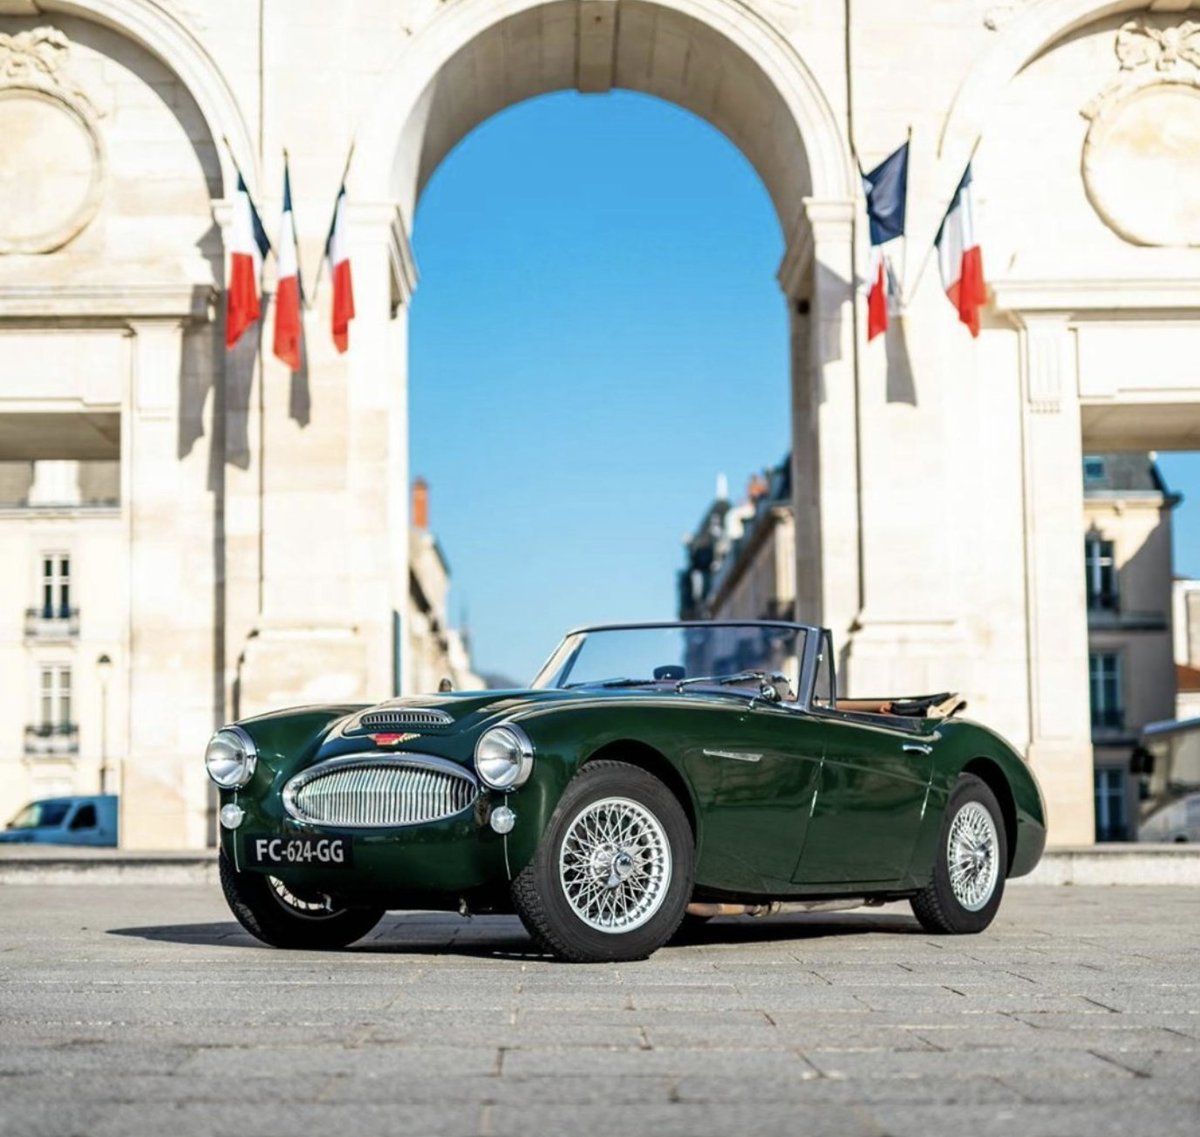 This 1964 Austin-Healey 3000 Mk III is a fabulous roadster in green!

Credit: @classic_trader

#classicaustinhealey #austin_healey #healey #classicroadster #bighealey